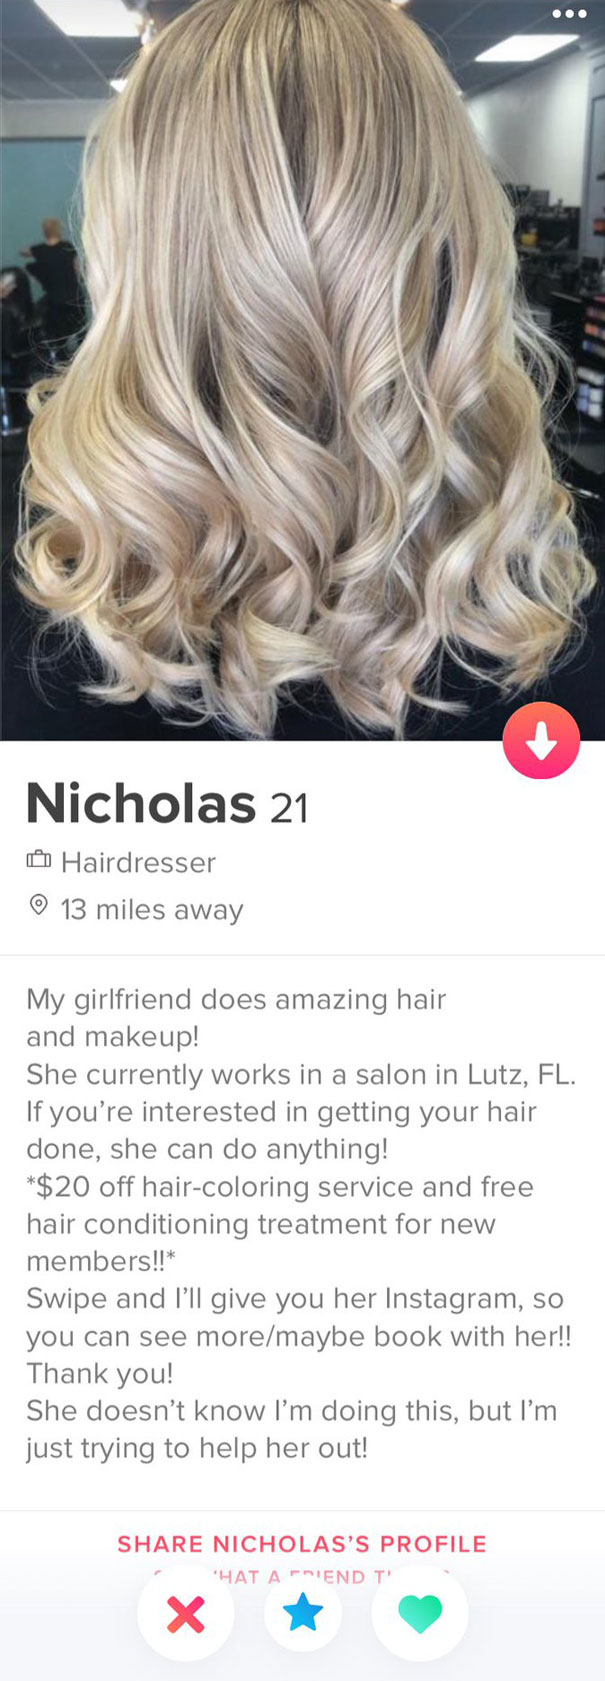 56 Funny Tinder Profiles That Will Make You Look Twice New Pics Bored Panda